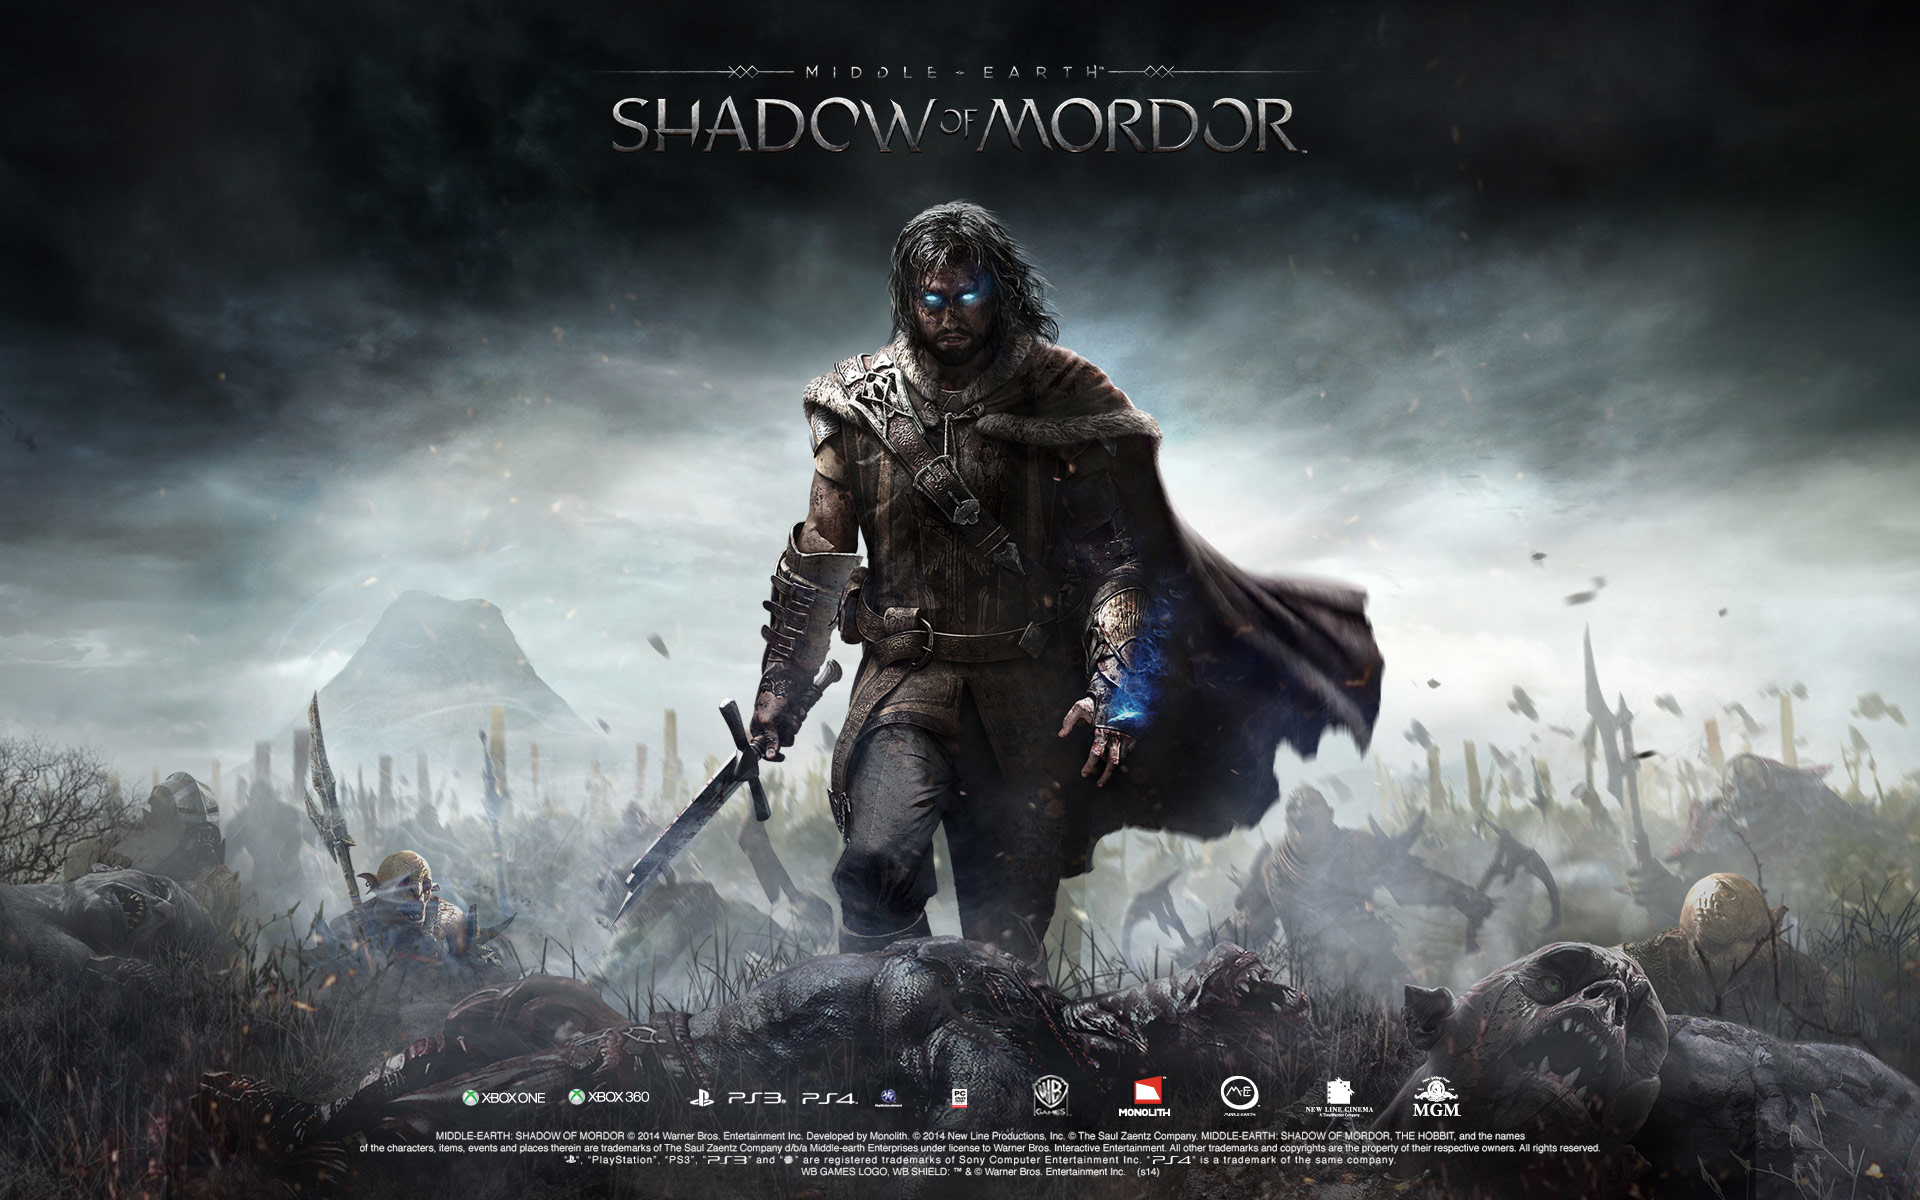 1920x1200 Middle Earth Shadow Of Mordor Character Closeup Picture Wallpaper 1920Ã1080  Shadow Of Mordor Wallpaper (32 Wallpapers) | Adorable Wallpapers |  Pinterest ...